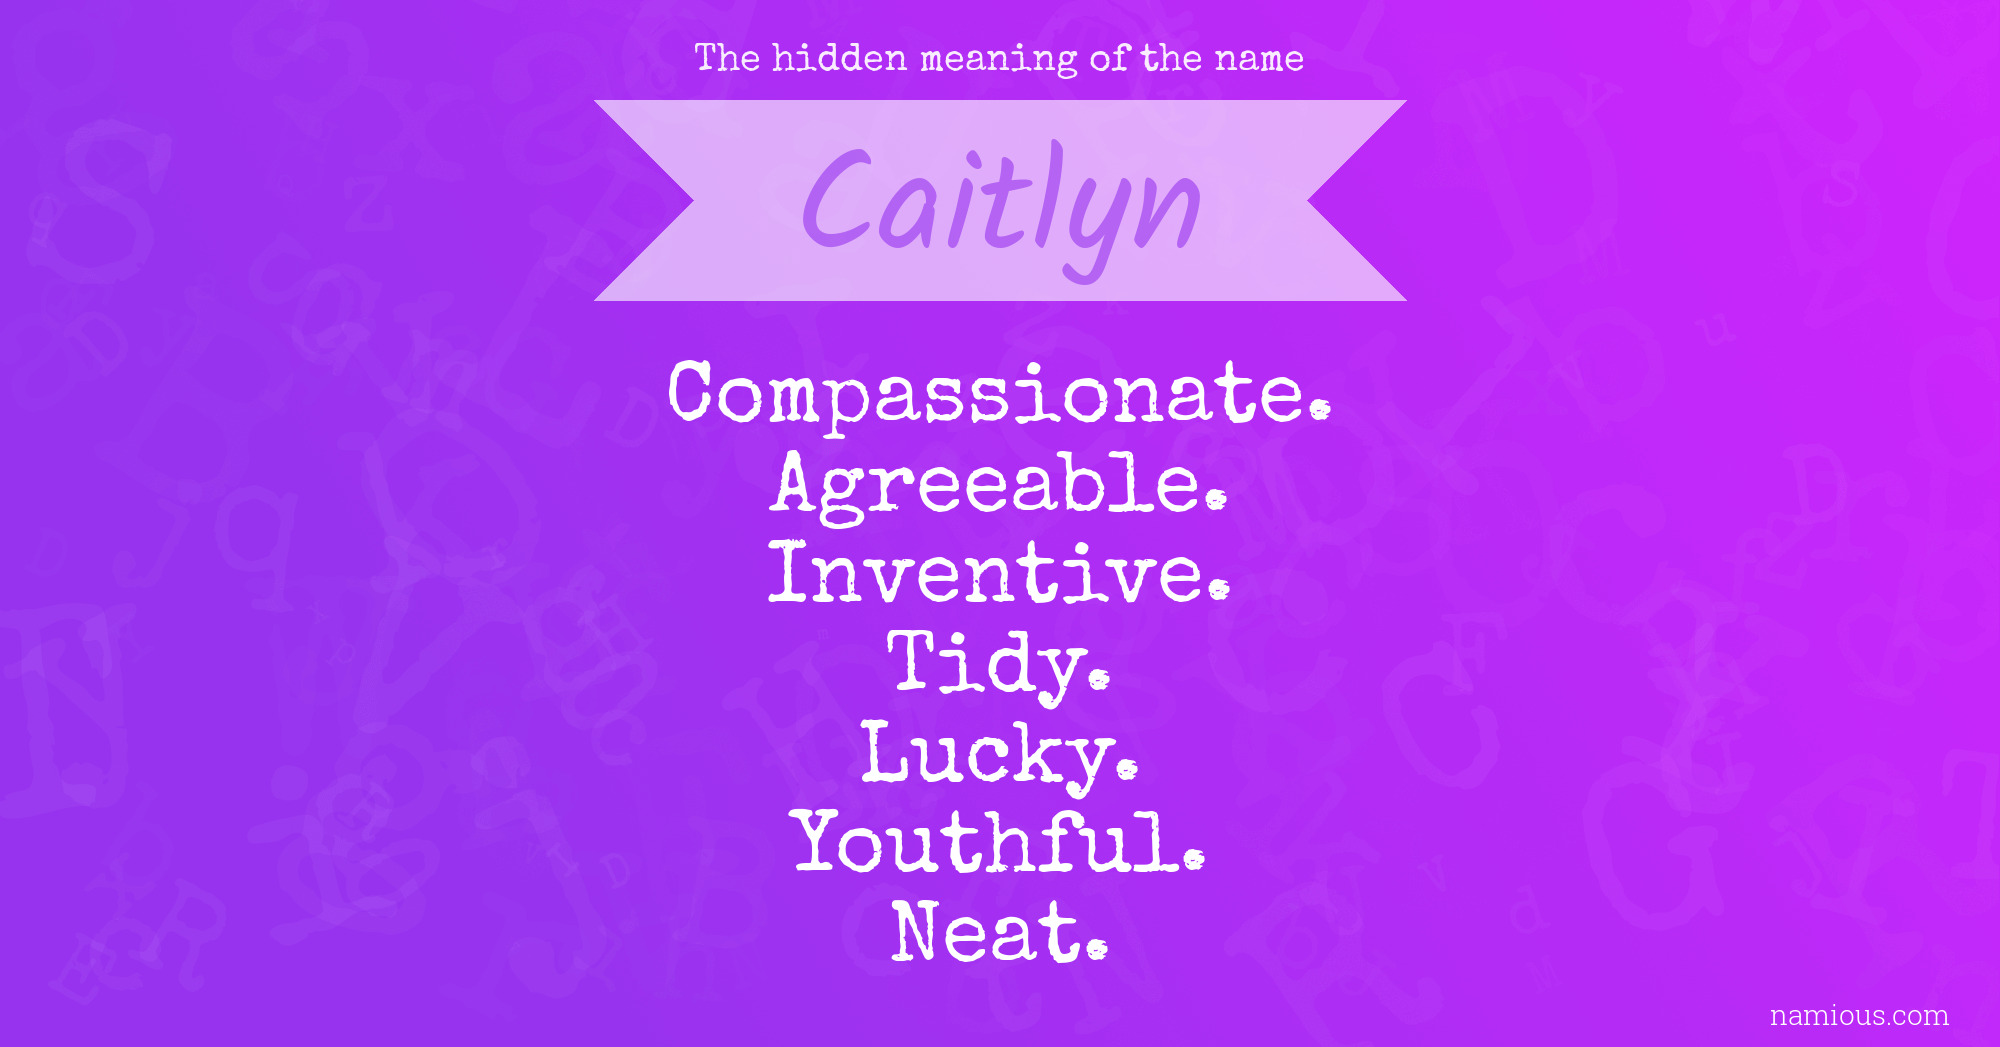 The hidden meaning of the name Caitlyn